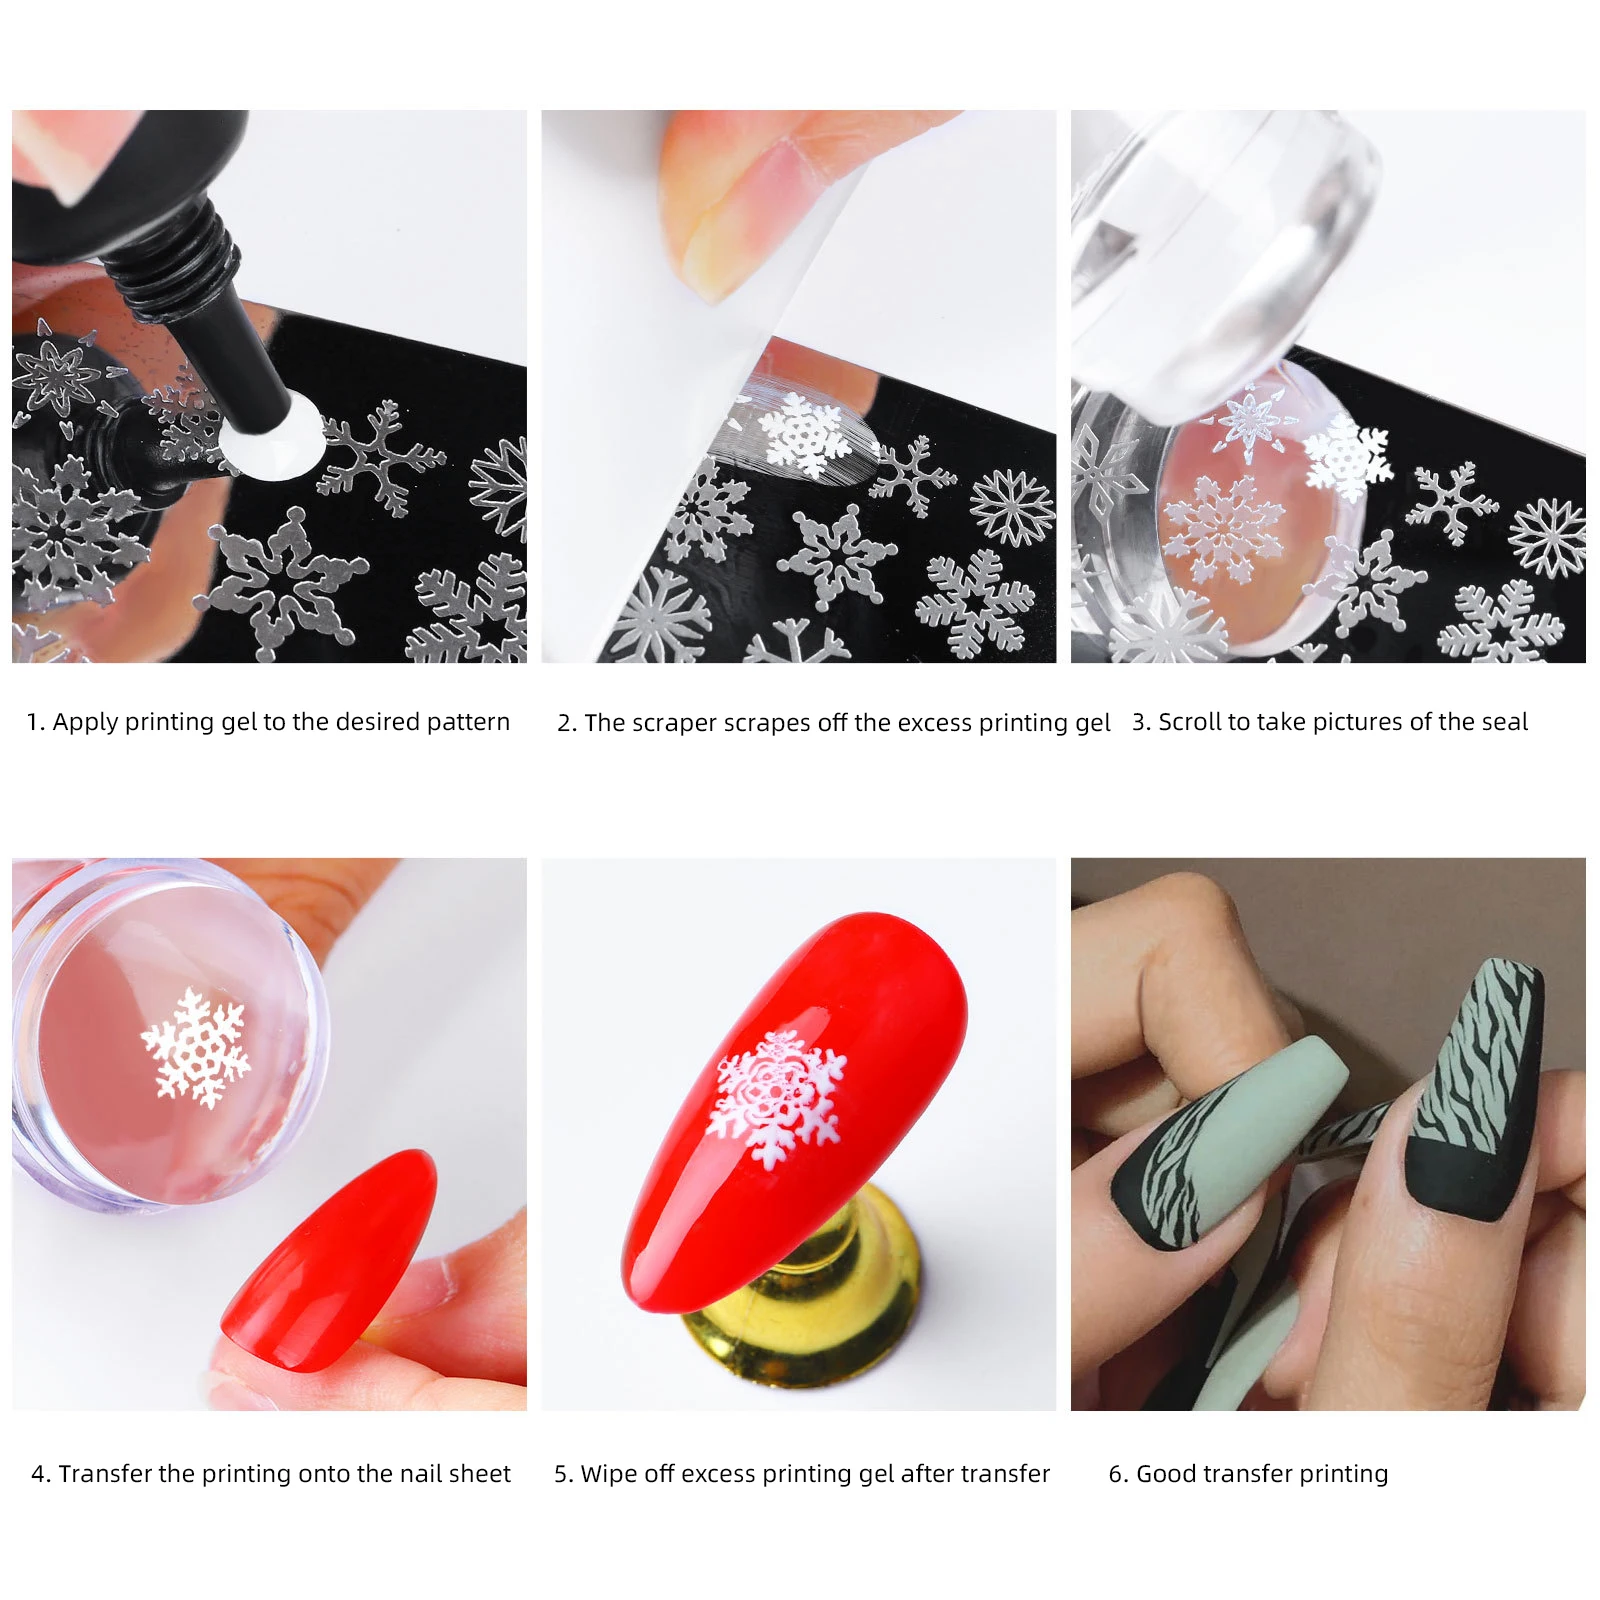 Clear Silicone Head for Your Nail Design